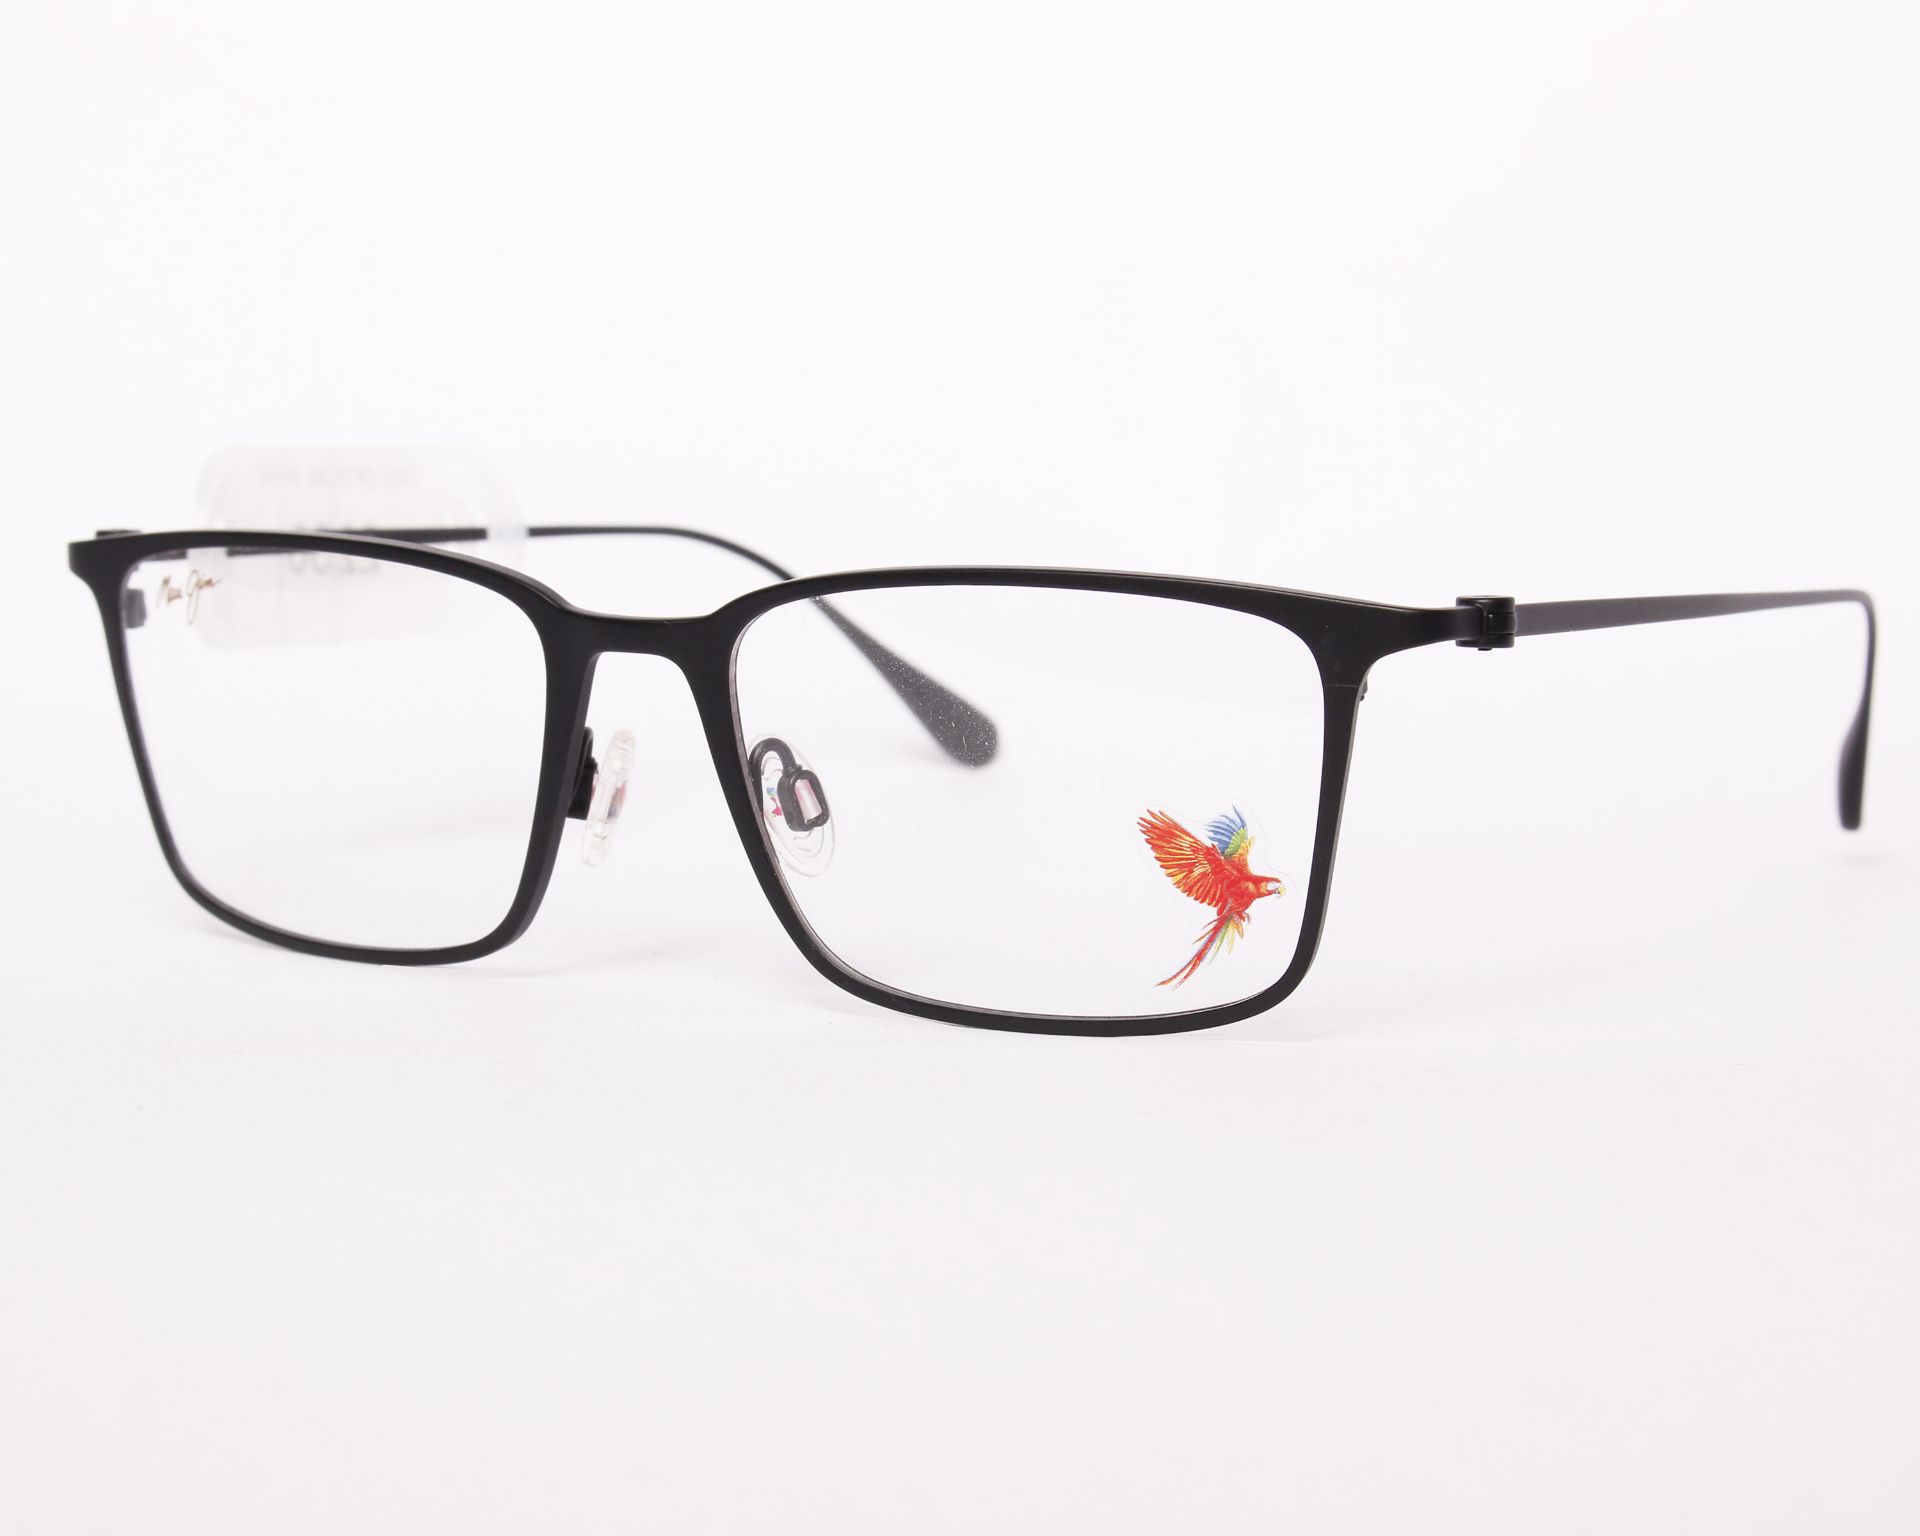 A pair of as new Maui Jim glasses frames with clear glass (RRP £250).